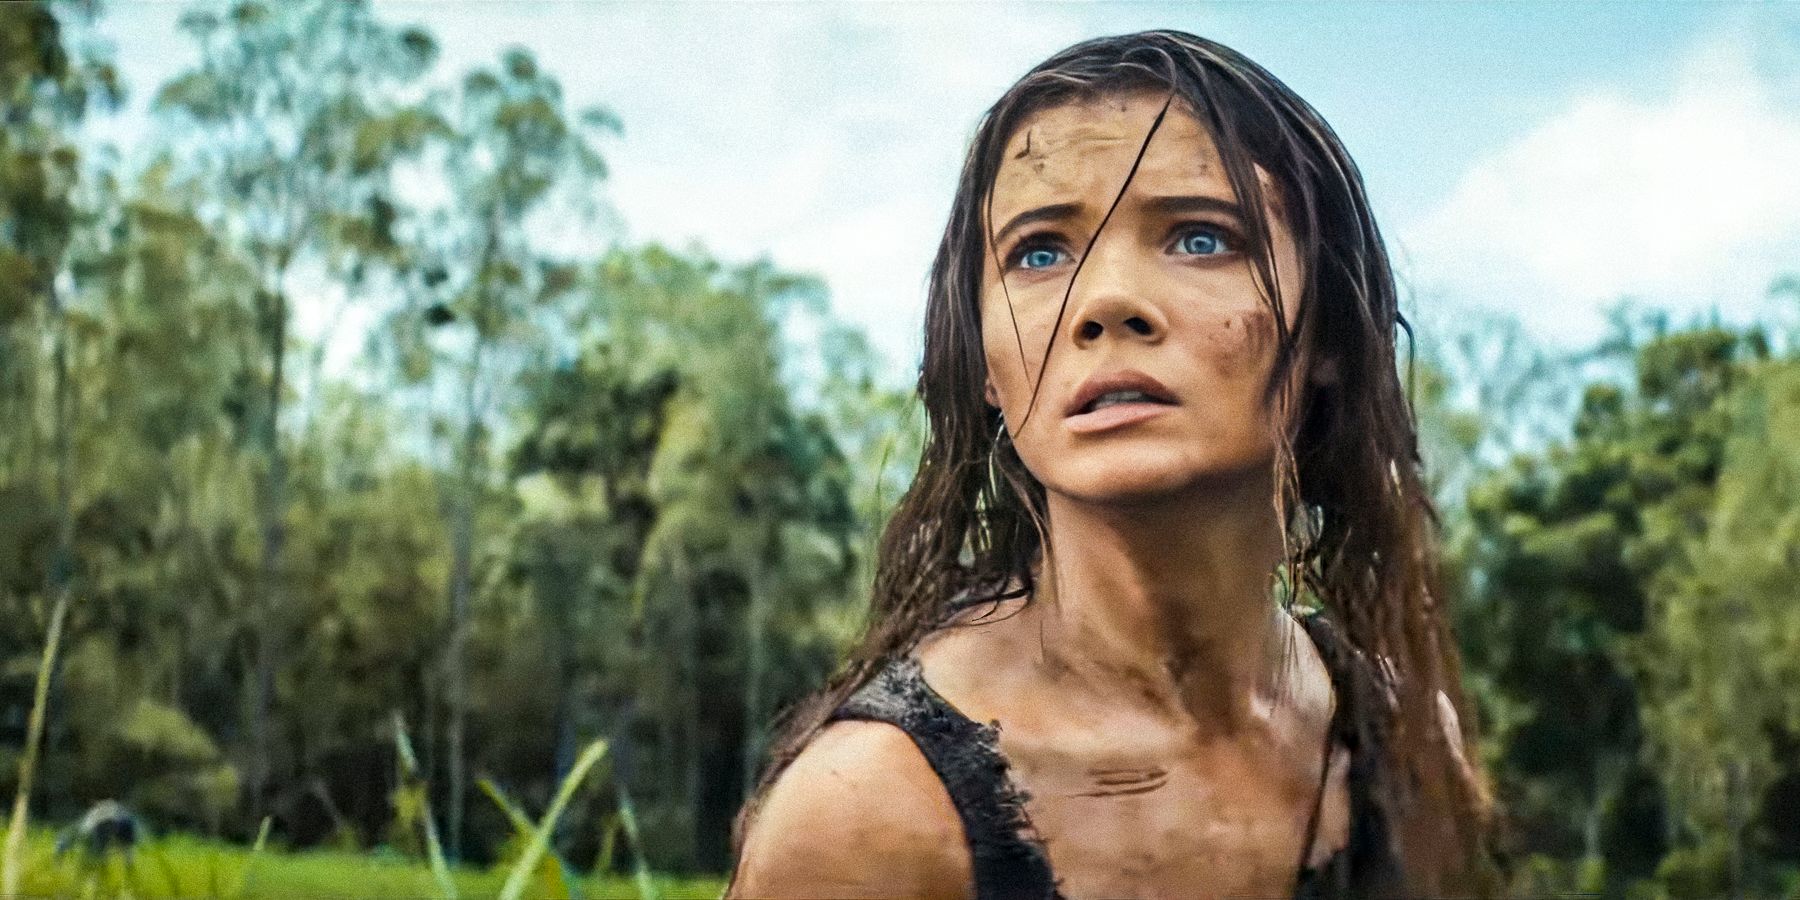  Freya Allan as Mae looking afraid in a field in Kingdom of the Planet of the Apes